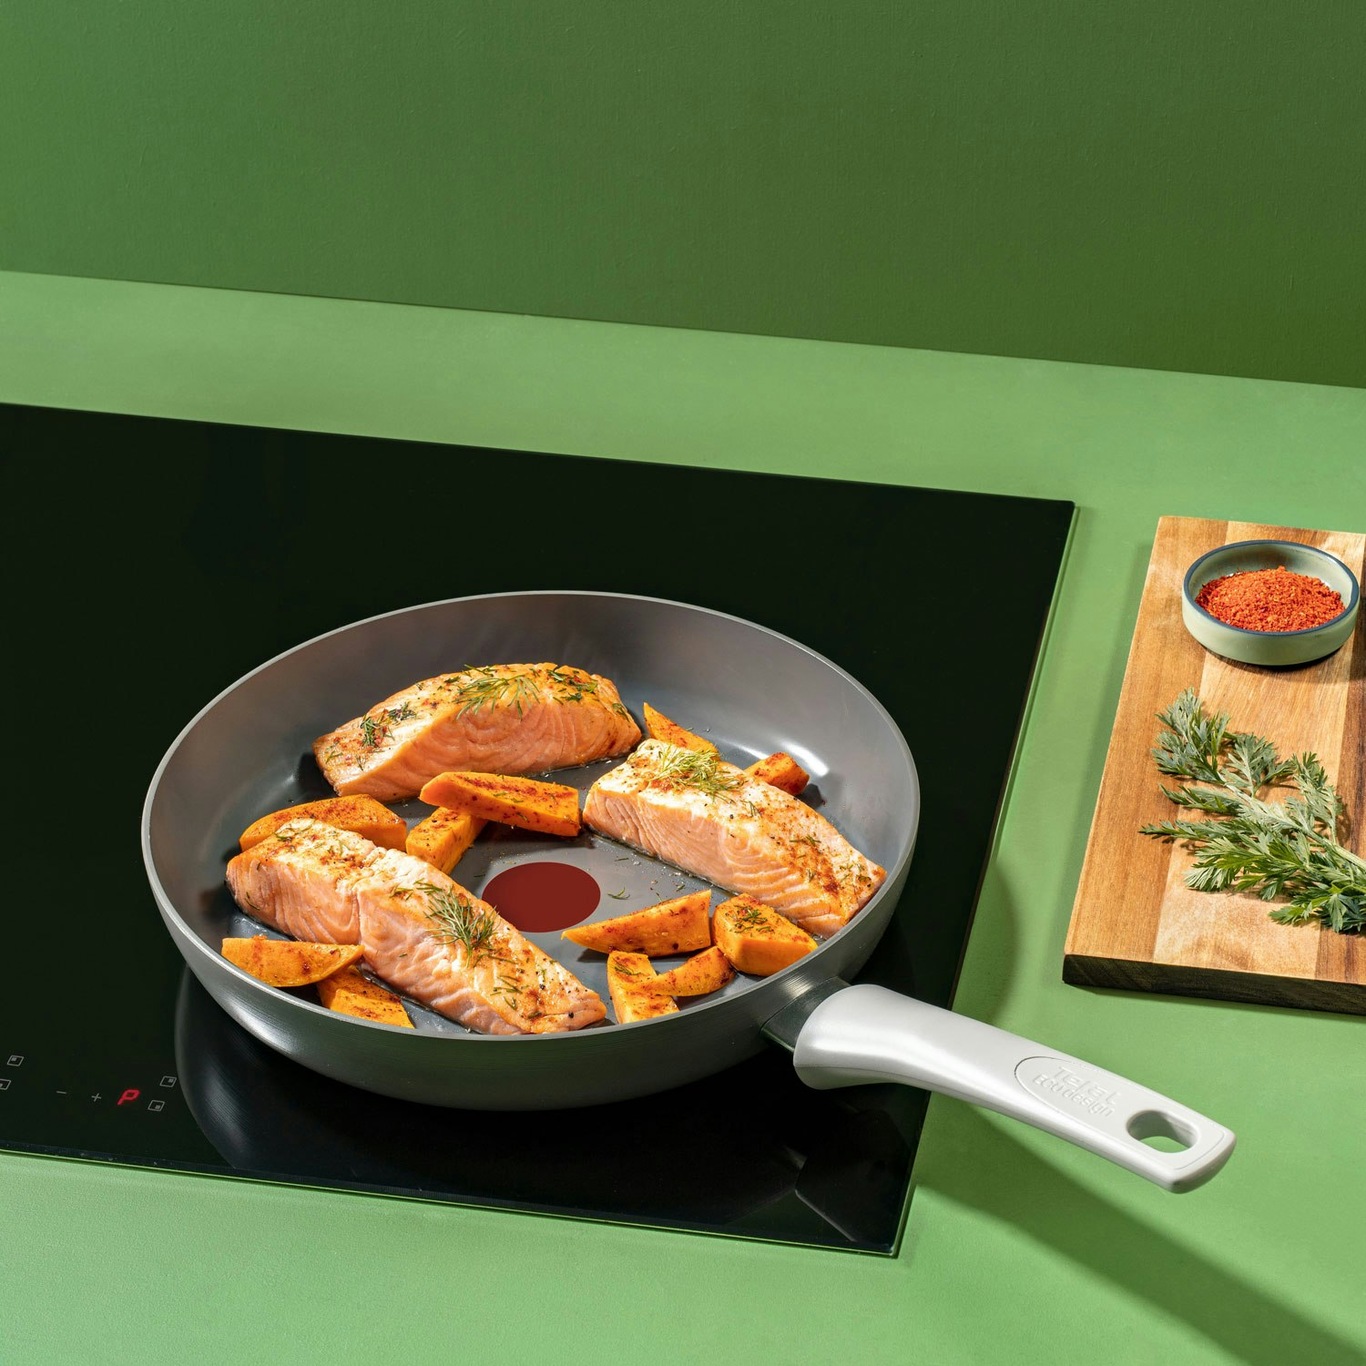 https://royaldesign.com/image/10/tefal-renew-on-frying-pan-2-pieces-1?w=800&quality=80